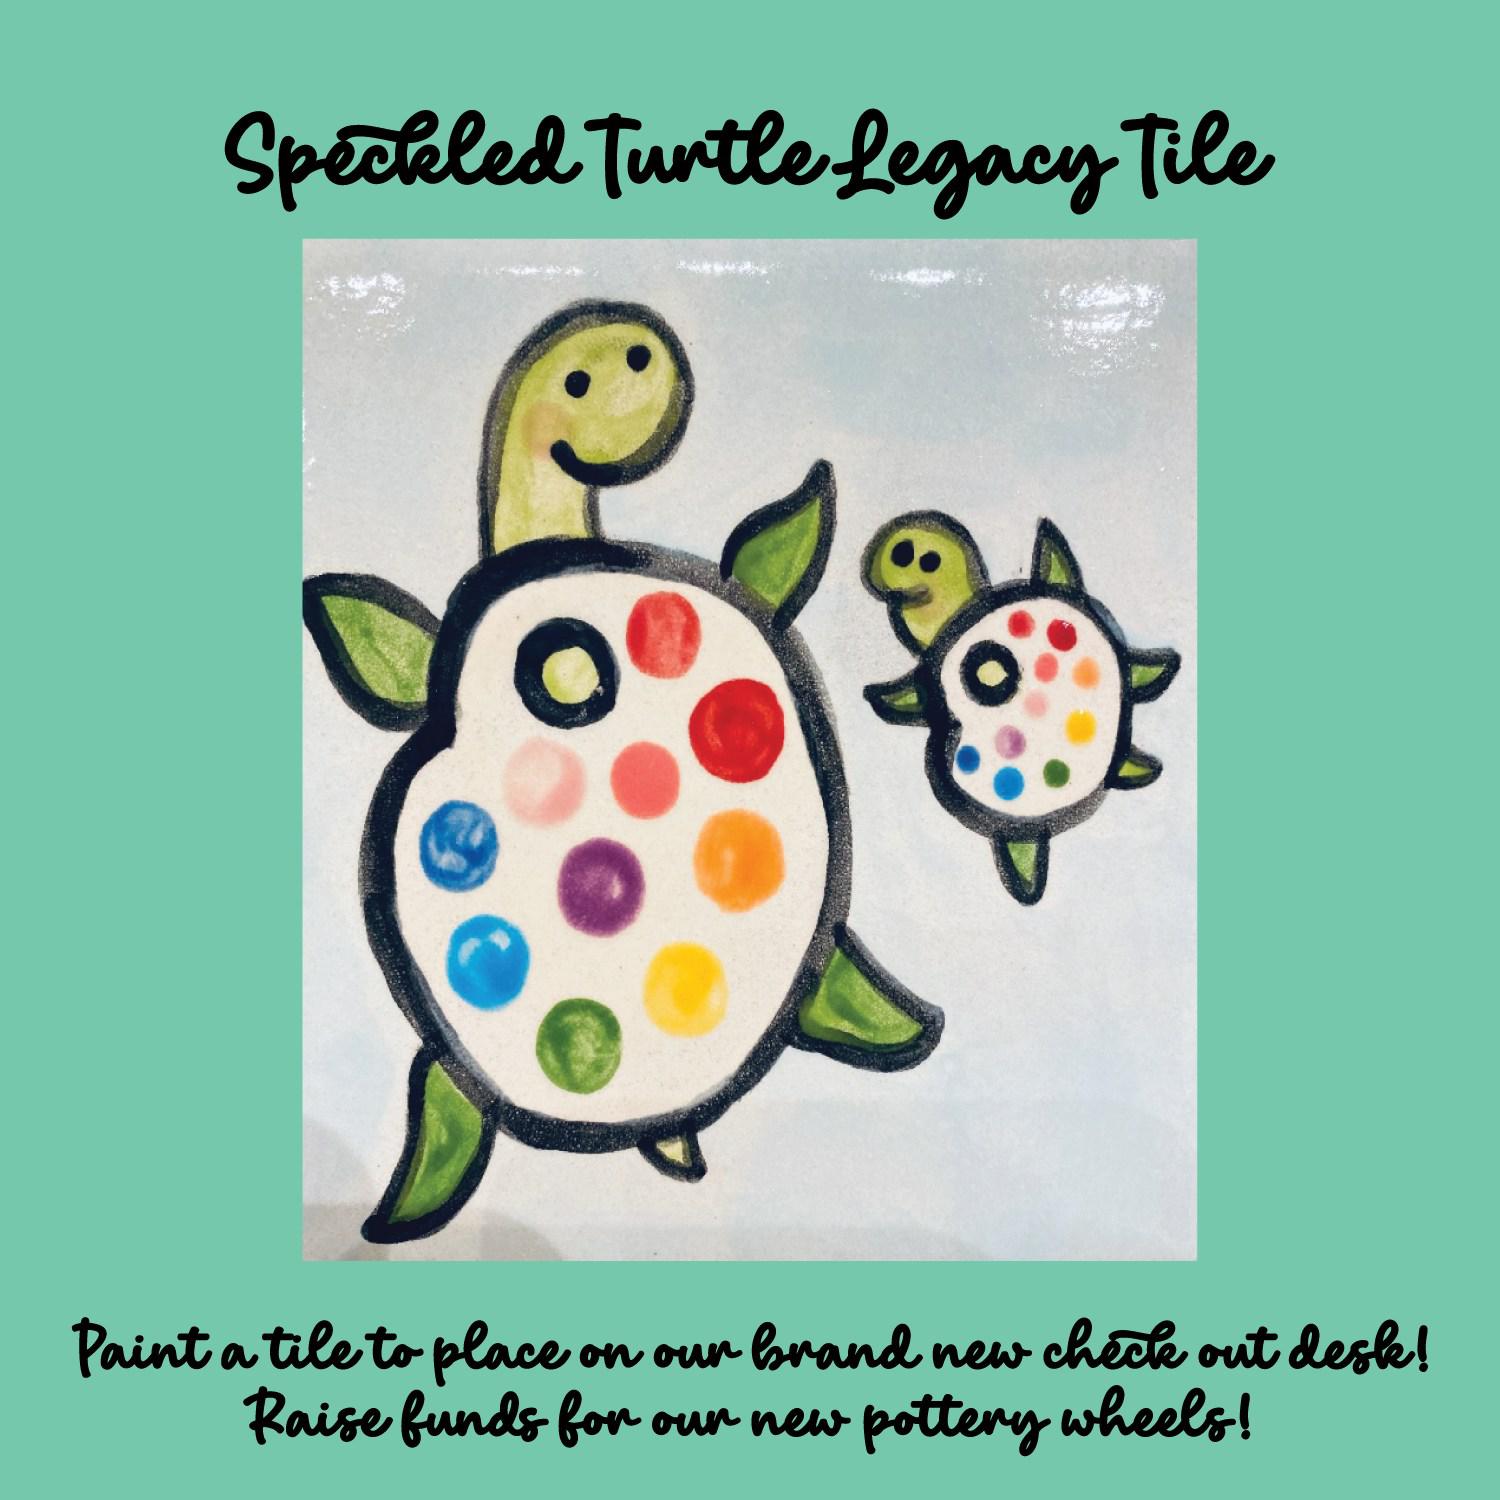 Hello Everyone! We are offering a Speckled Turtle Pottery Studio Membership and Legacy Tile to raise money for the pottery wheels! You can also just make a donation if you would like! **Membership includes 20% off the entire year starting now to use at Southern Ink and Clay until June 1, 2025.